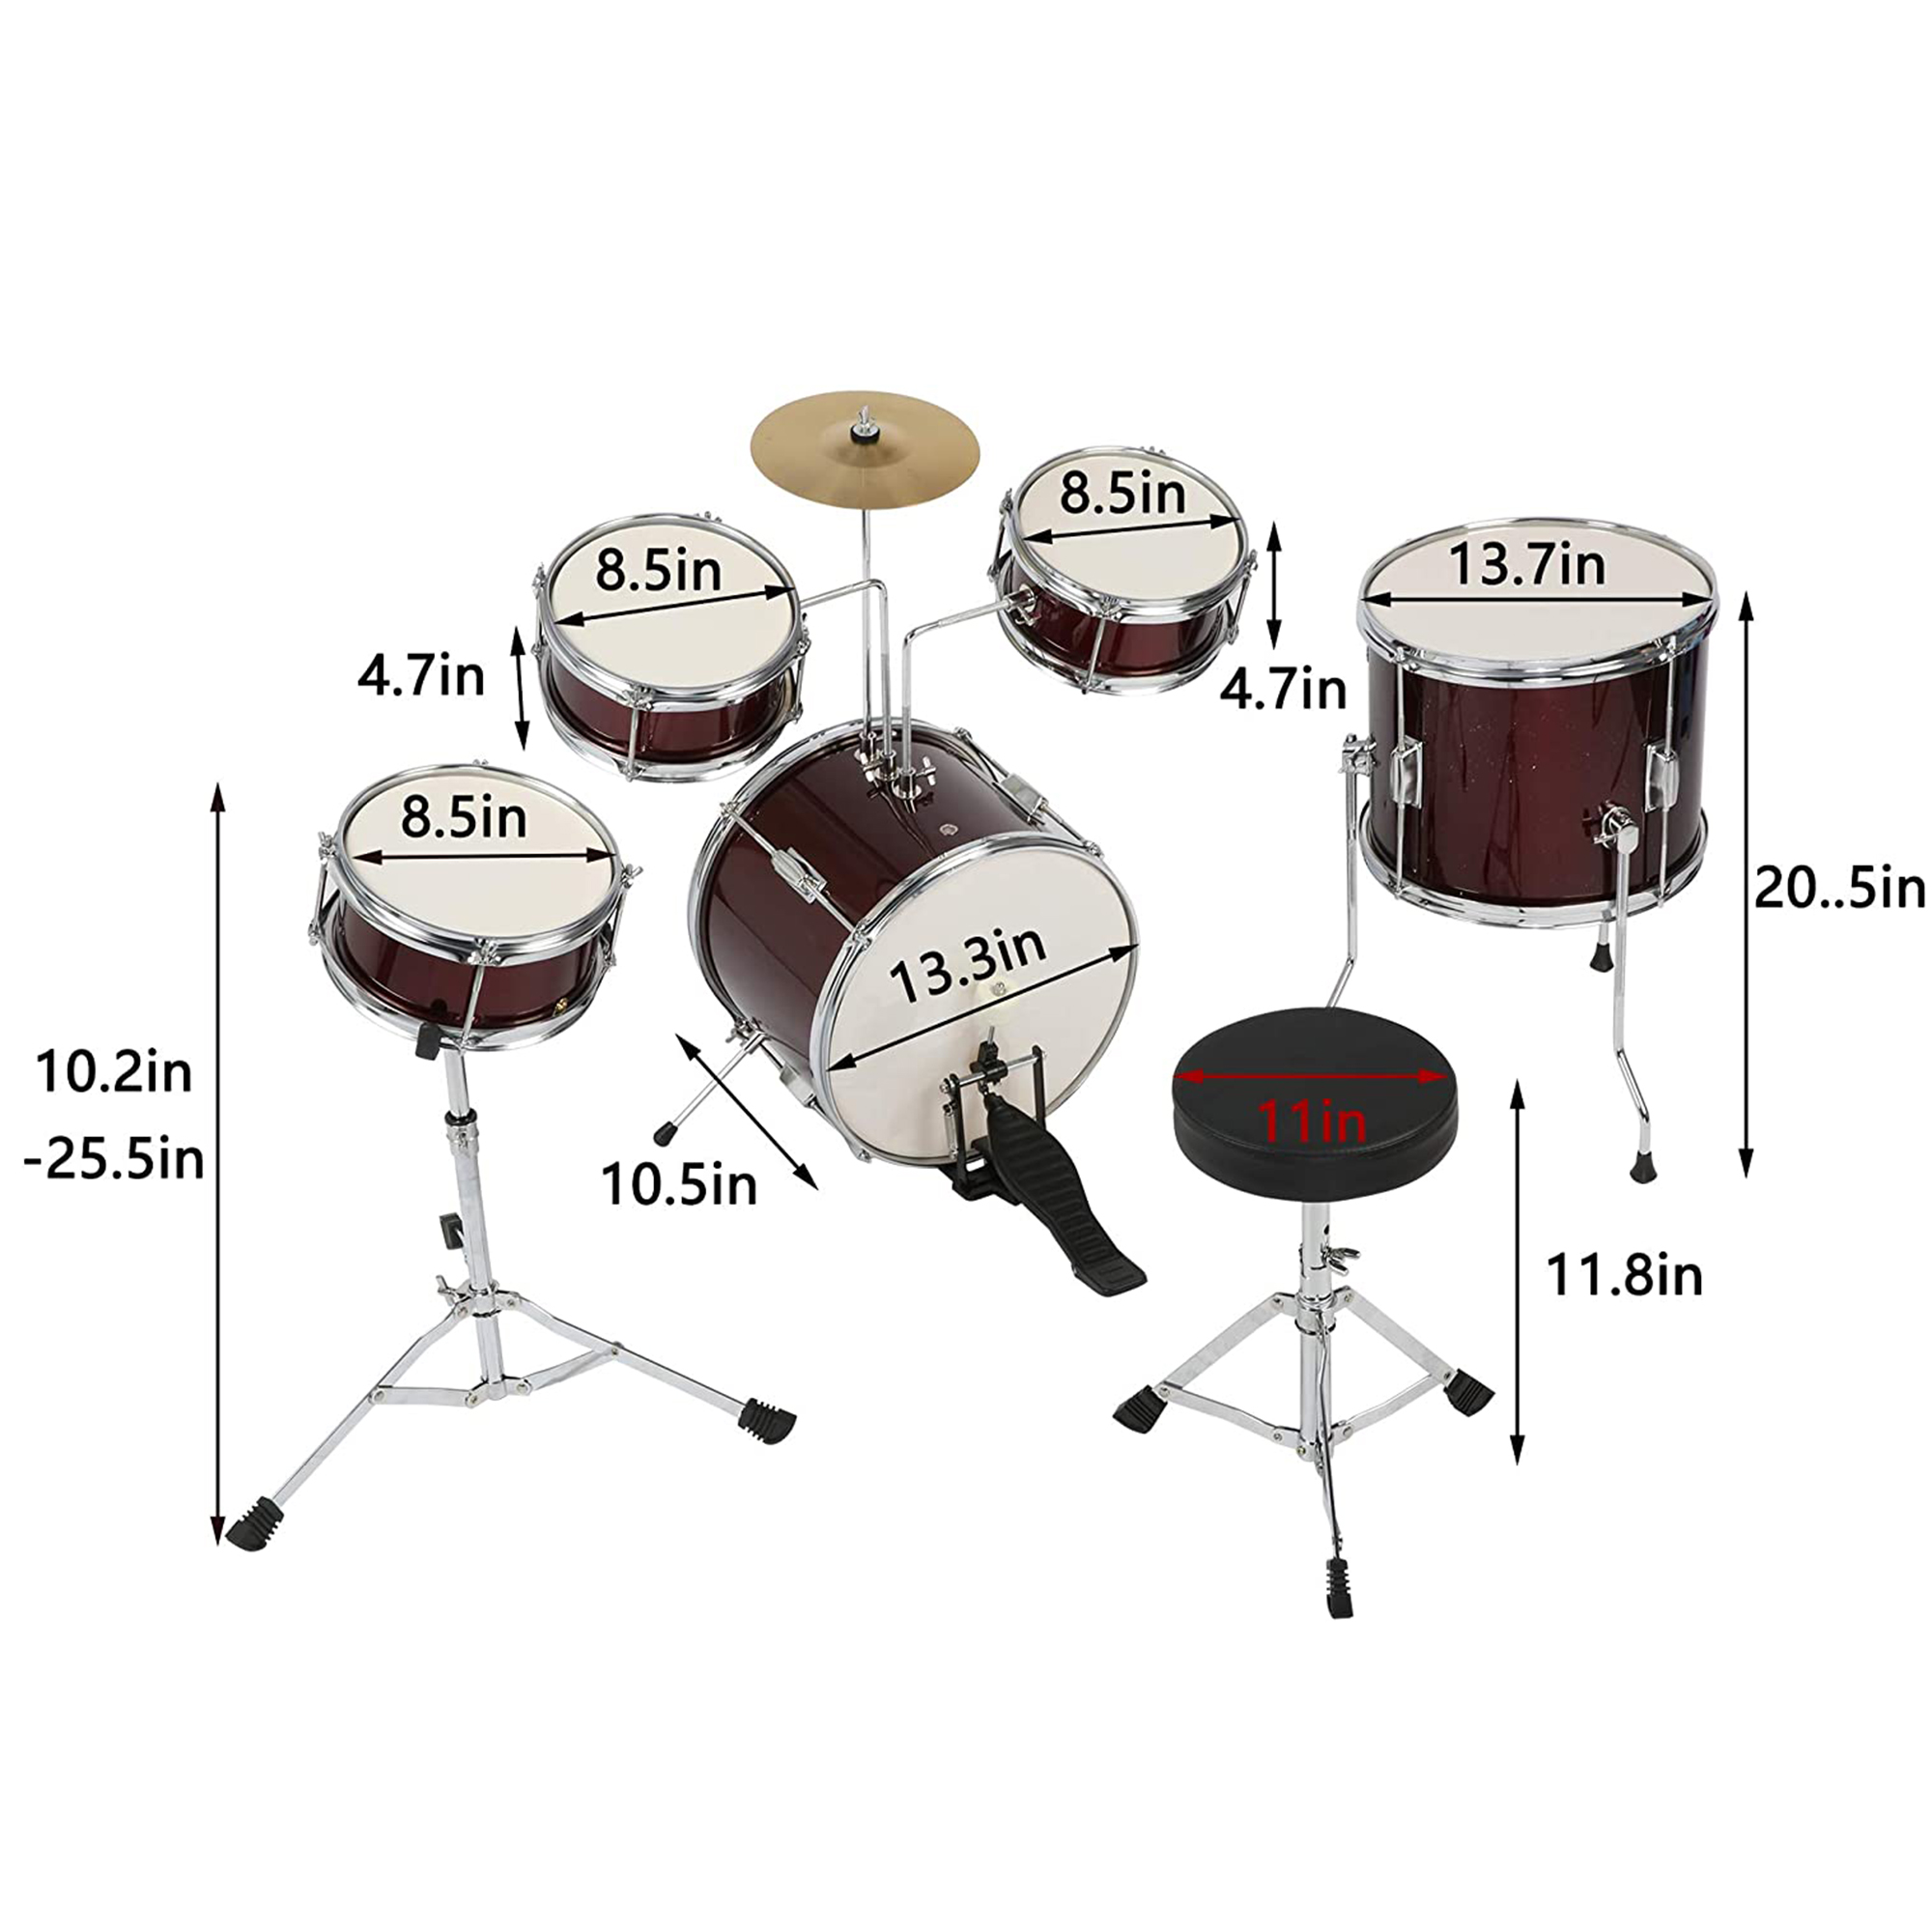 KARMAS PRODUCT Kids Drum Set 5-Piece Junior Musical Instrument Beginner Kit with 14" Bass, Adjustable Throne, Cymbals, Pedals, Drumsticks - image 4 of 7